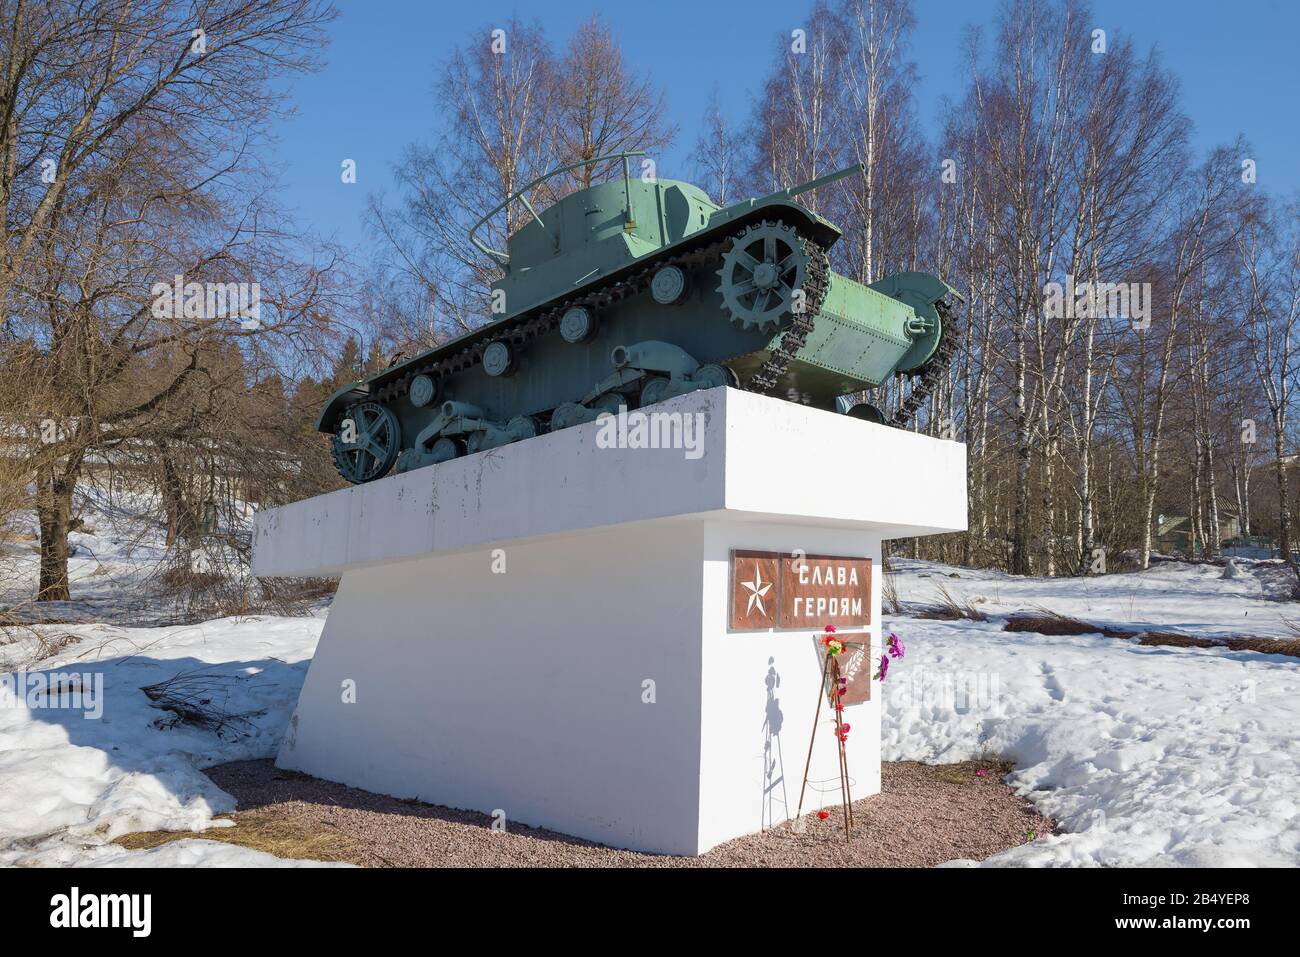 PITKYARANTA, RUSSIA - APRIL 06, 2019: Tank T-26 - monument 'Glory to the heroes!' in memory of the Great Patriotic War Stock Photo